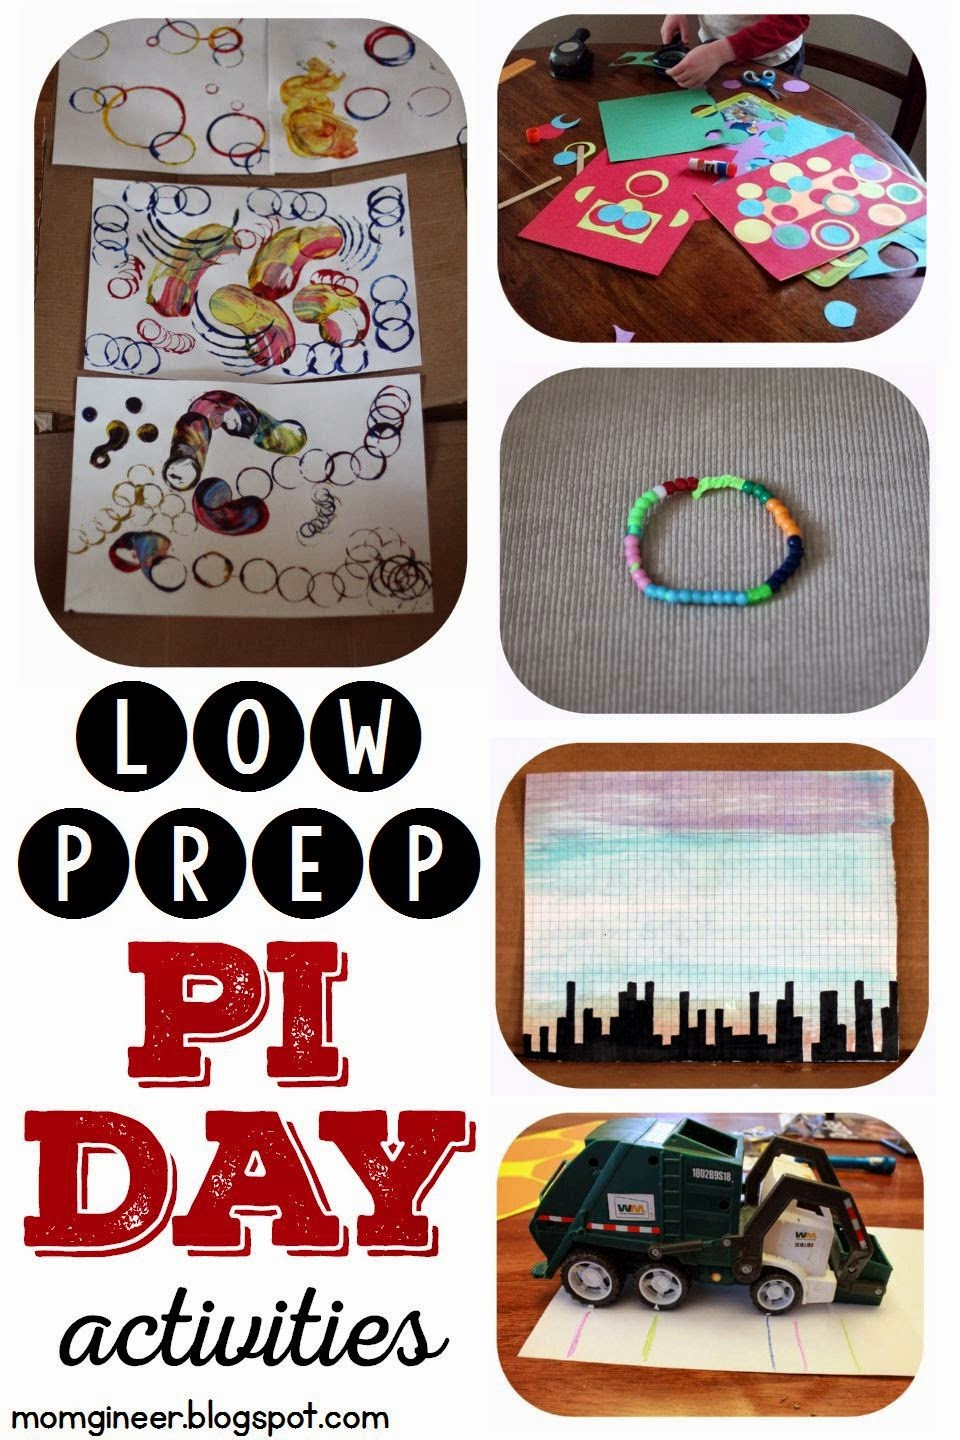 Pi Day Elementary Activities
 Some of the Best Things in Life are Mistakes Celebrate Pi